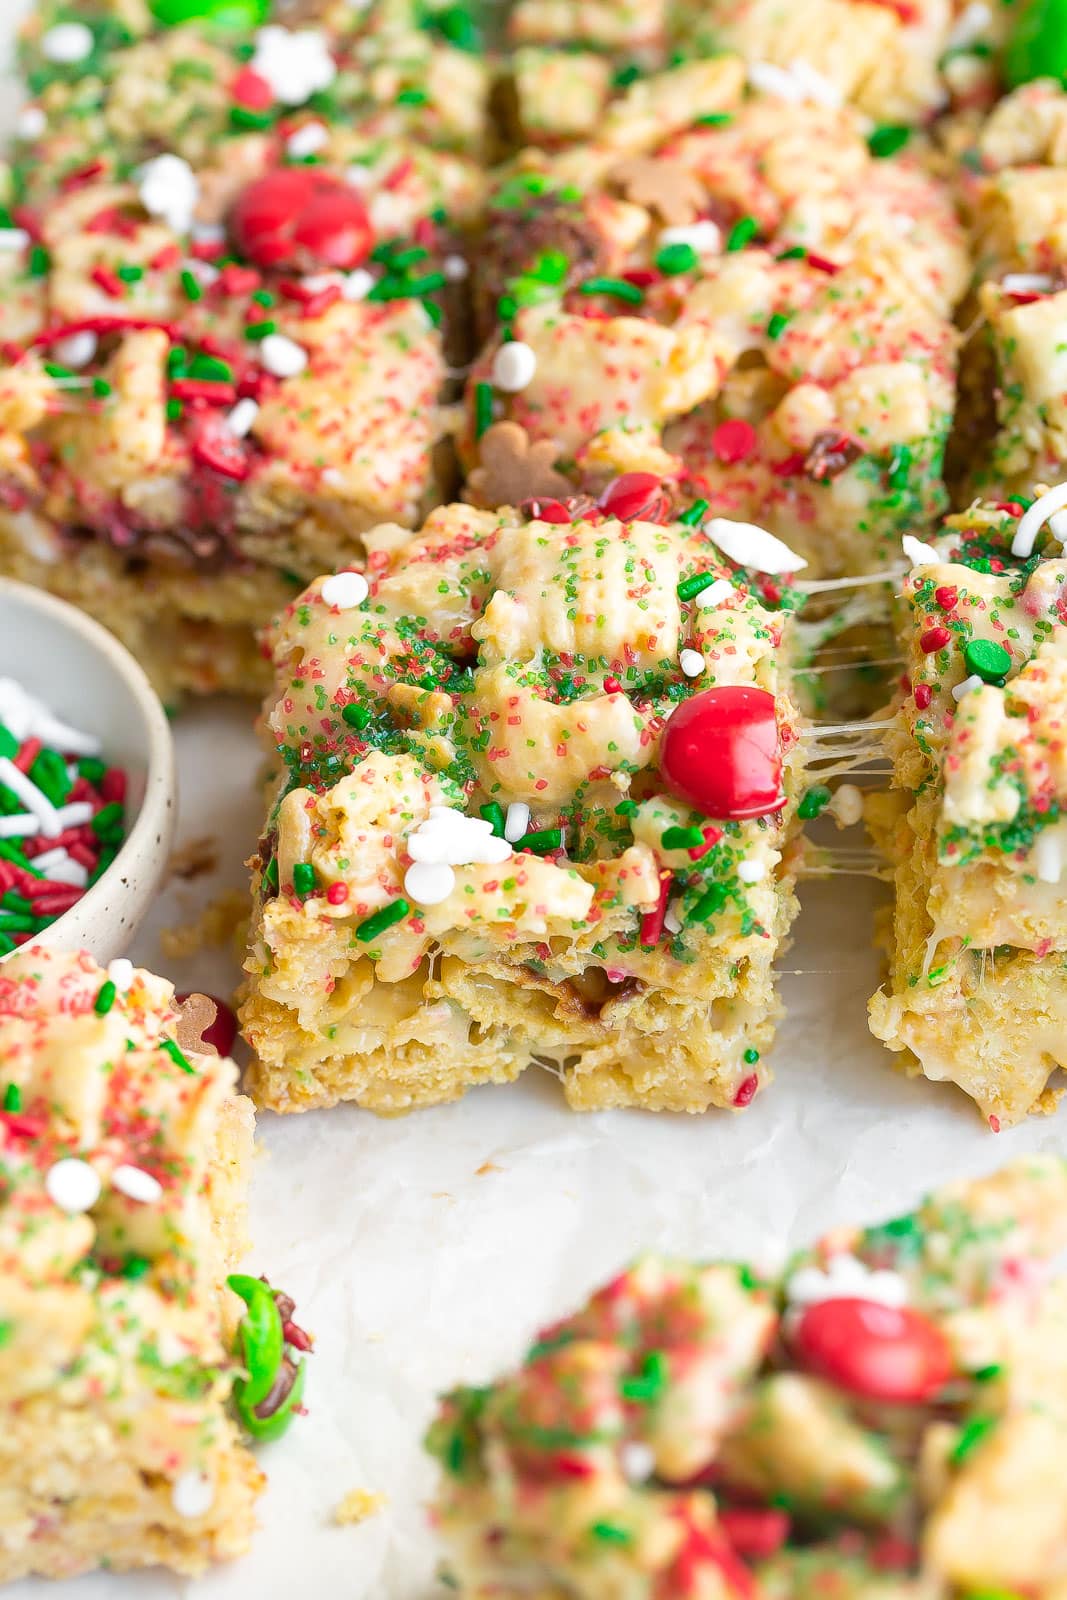 Gooey rice krispie treat with Christmas sprinkles and M&Ms.